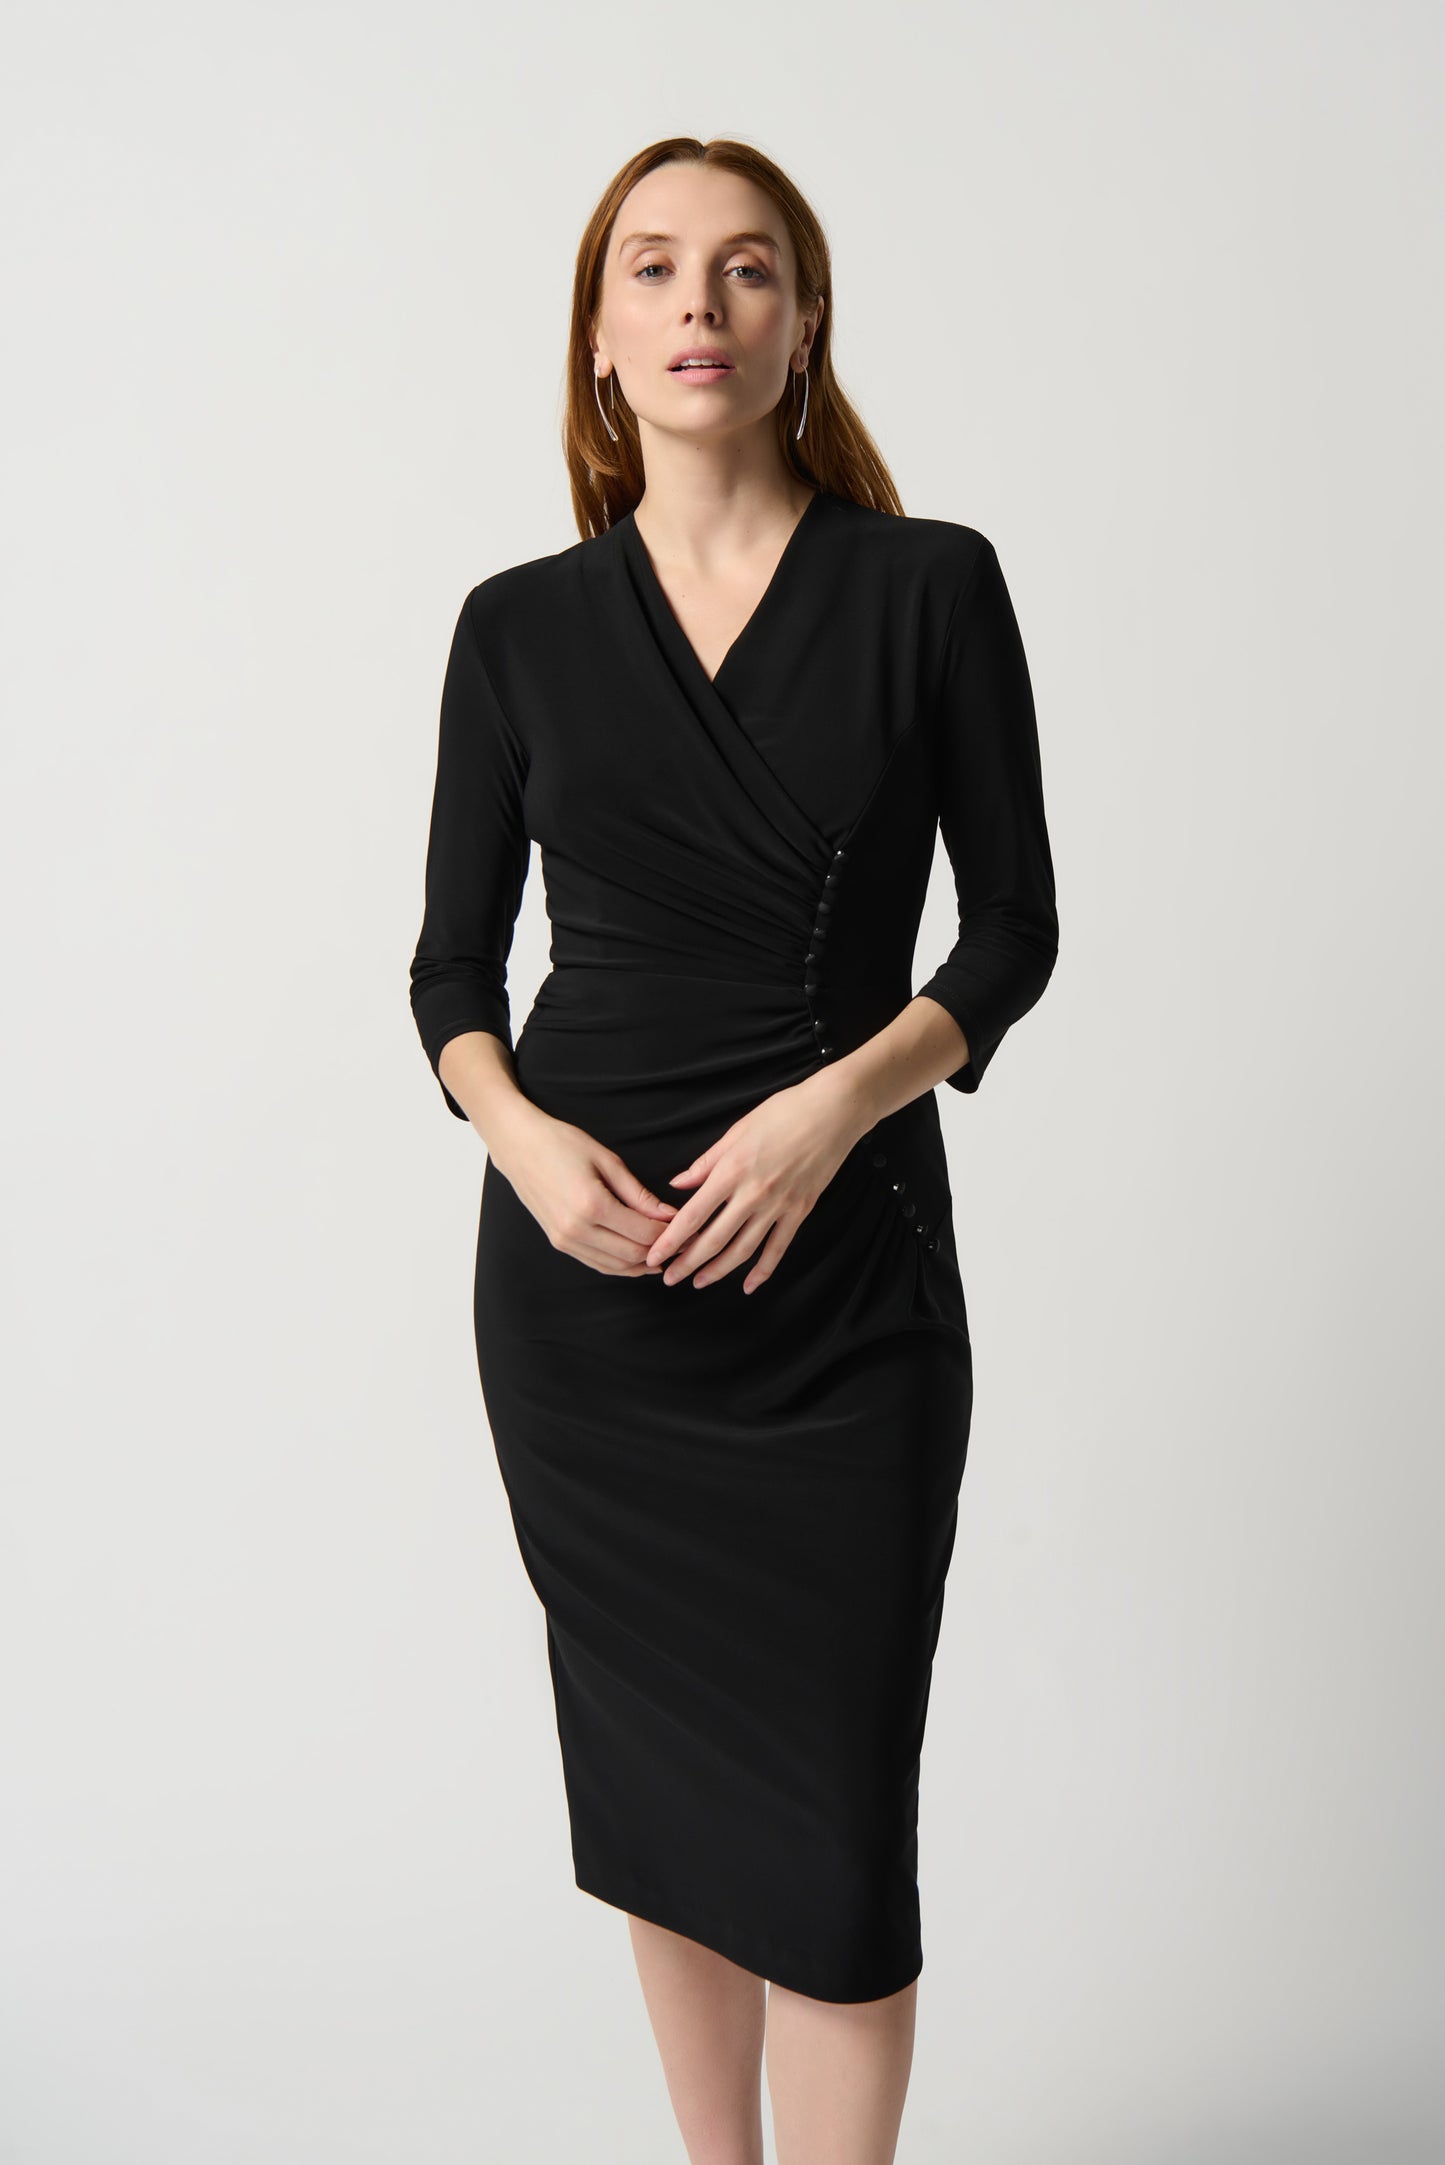 Silky Knit Sheath Dress With Front Pleats
234272